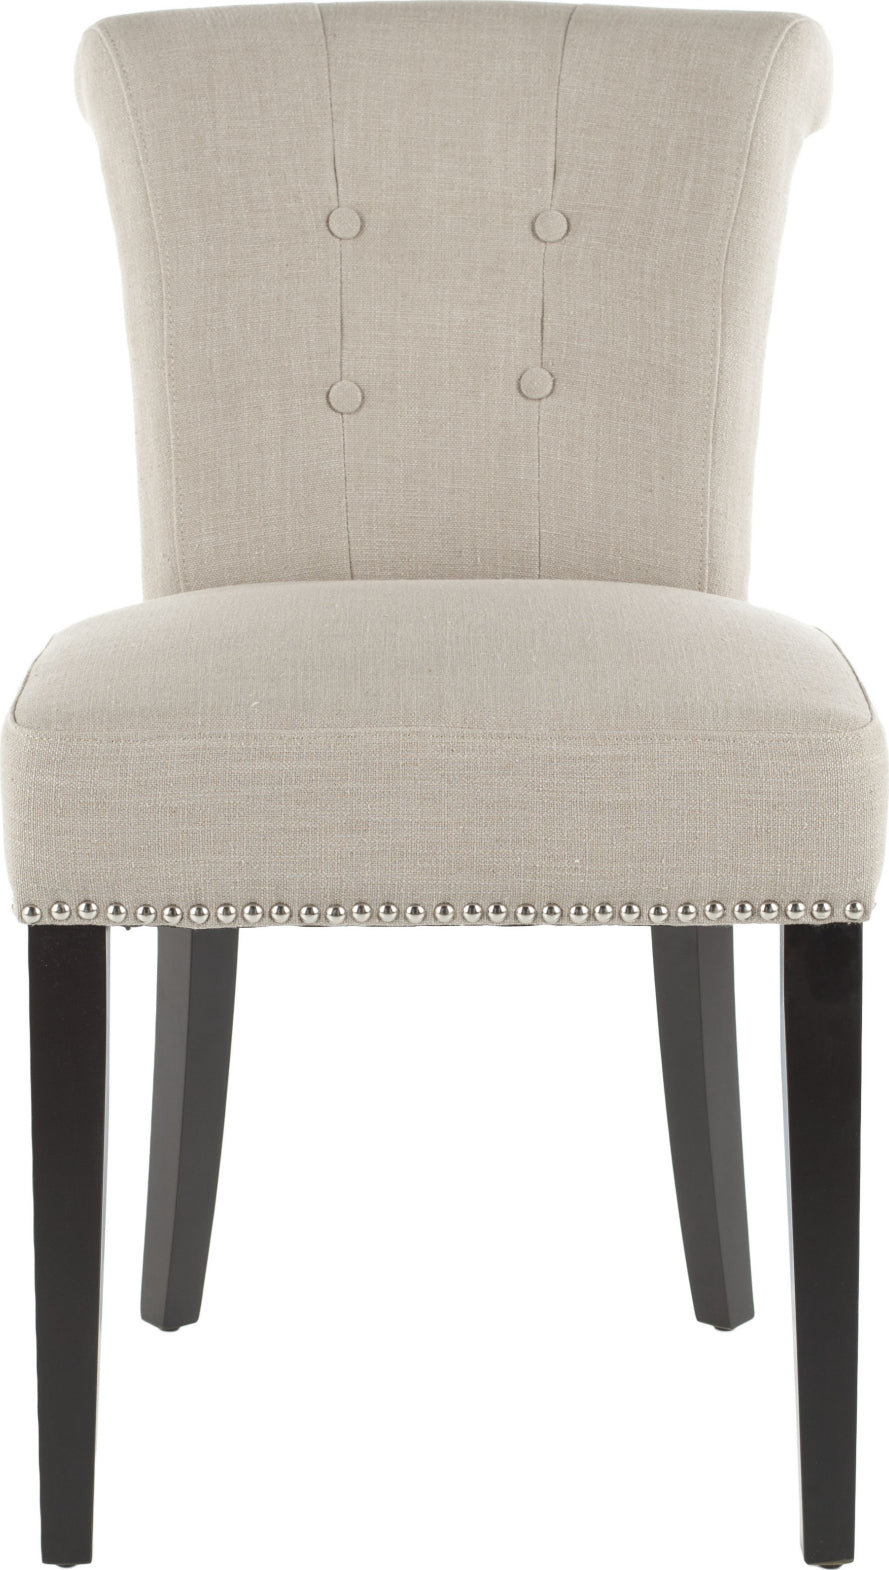 Safavieh Sinclaire 21''H Kd Side Chairs (SET Of 2)-Silver Nail Heads True Taupe and Espresso Furniture main image